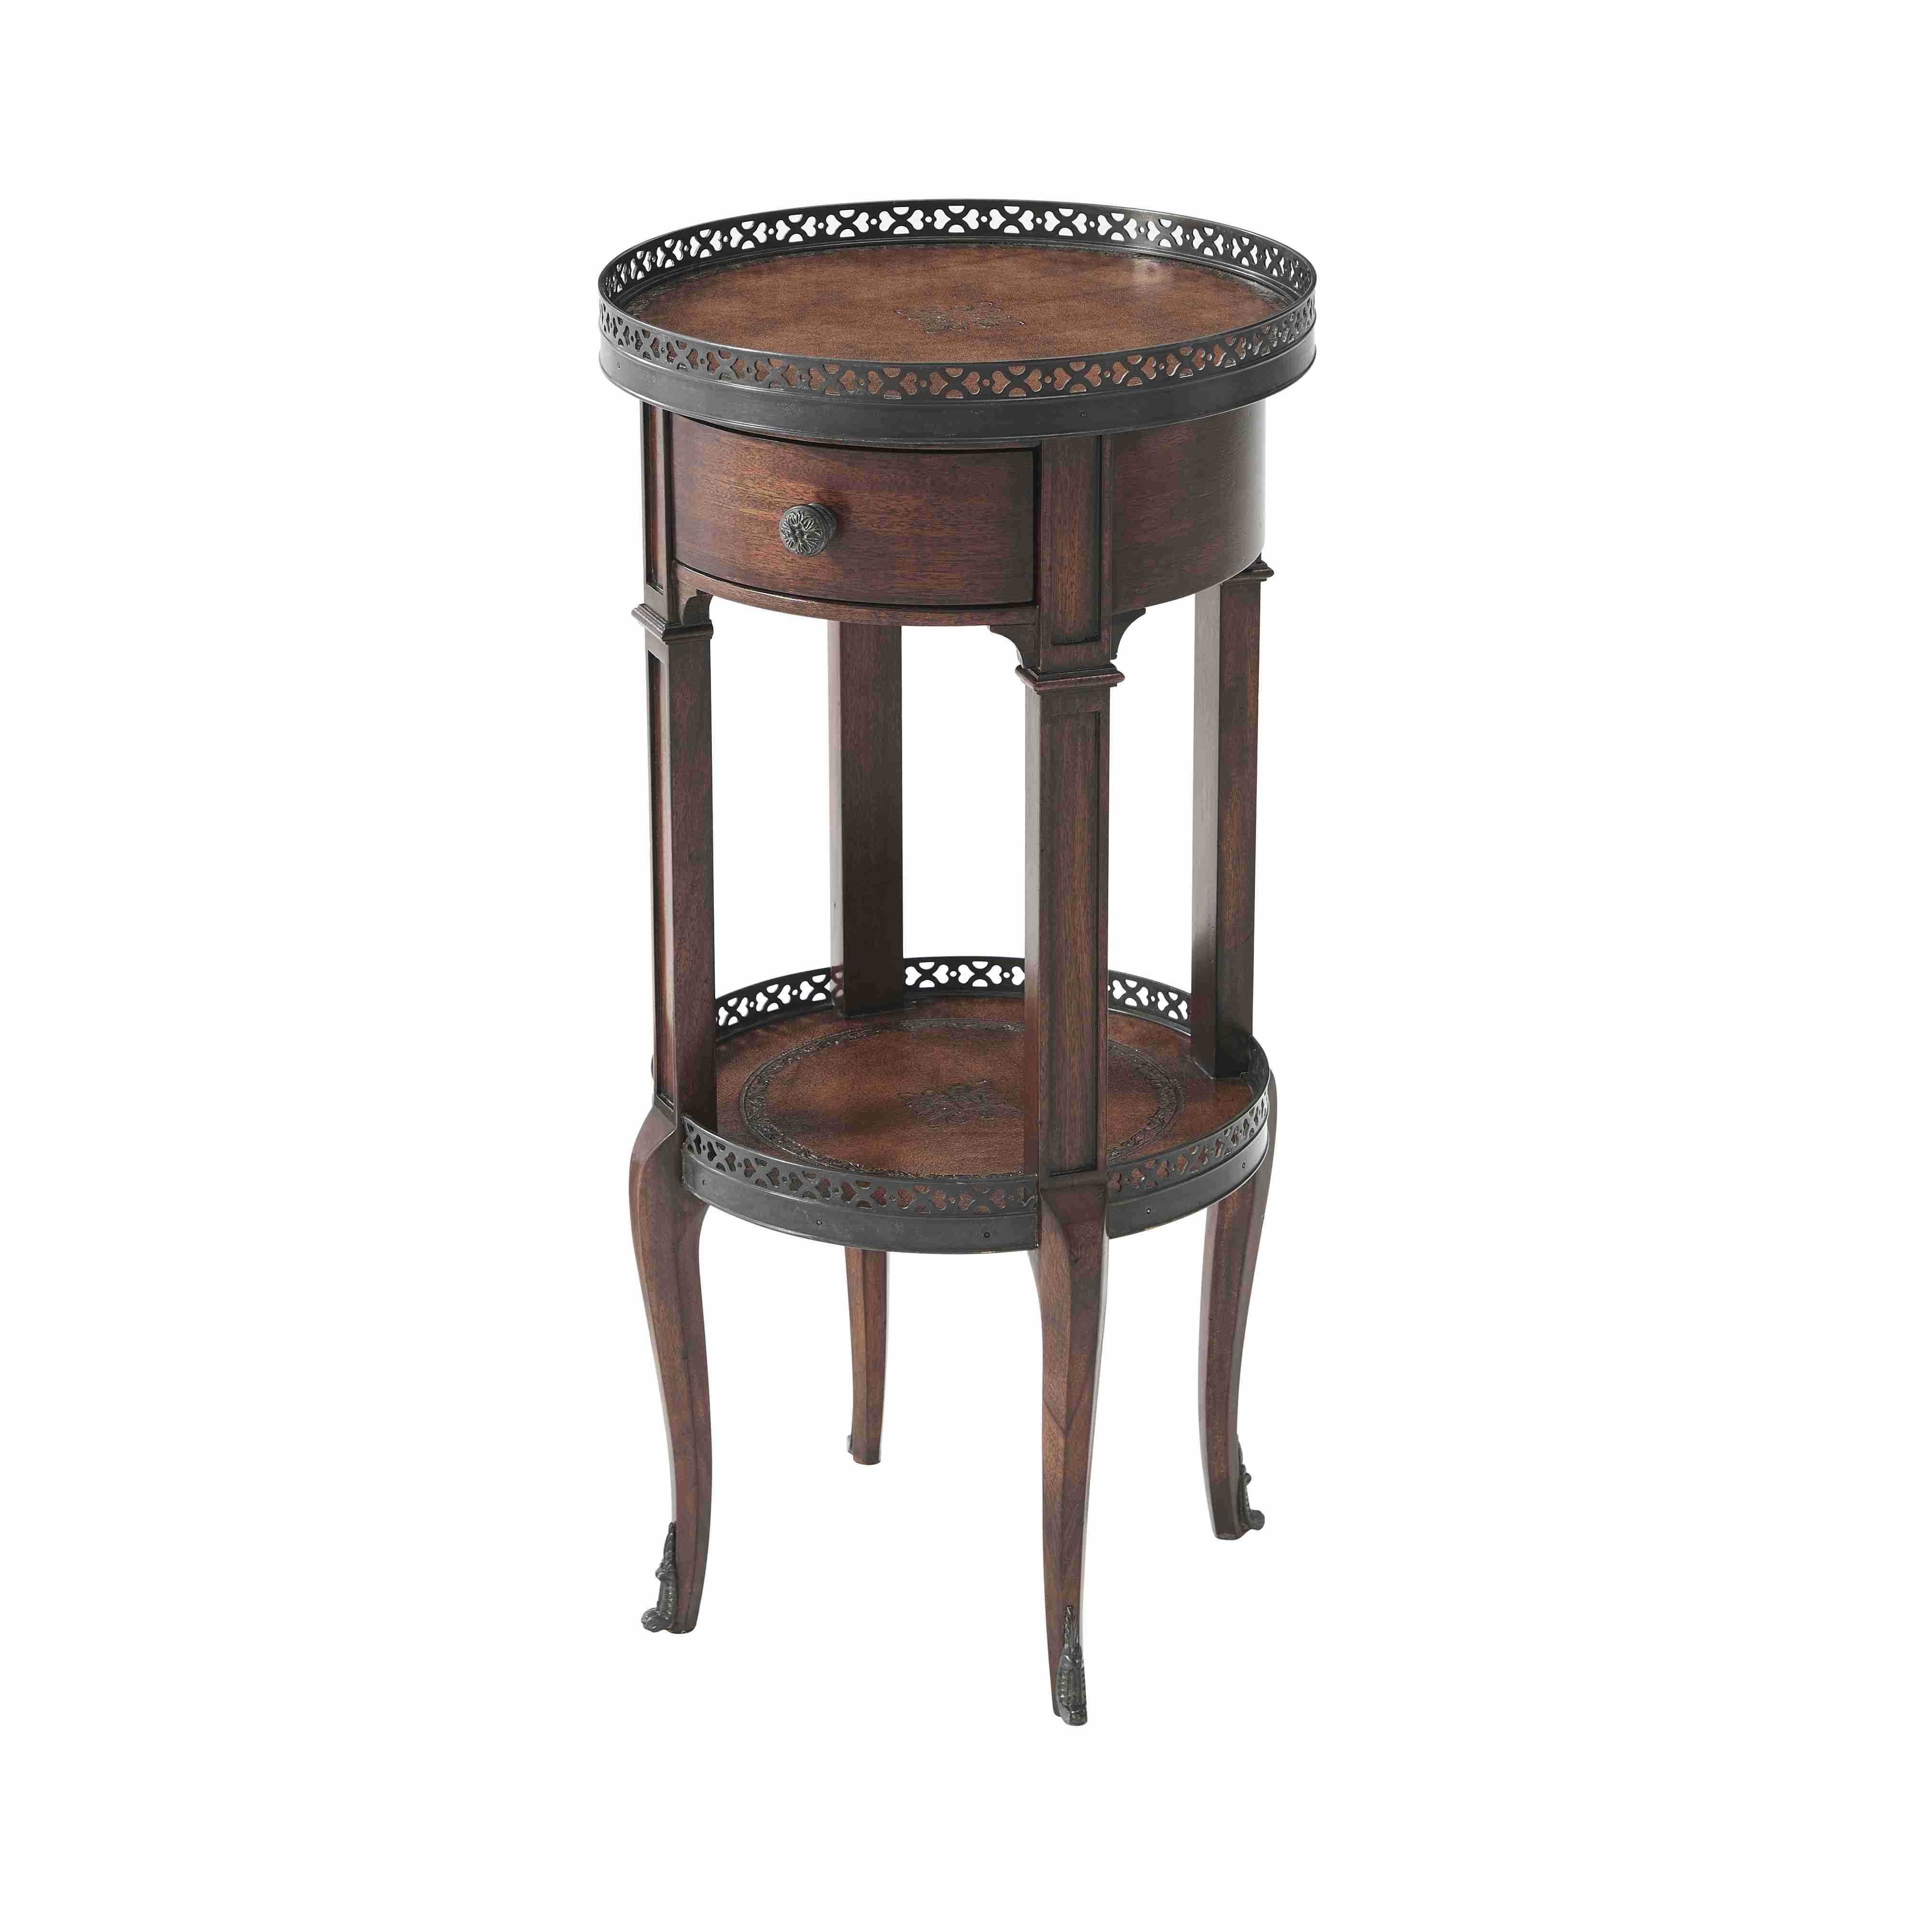 WALNUT CIRCLE ACCENT TABLE